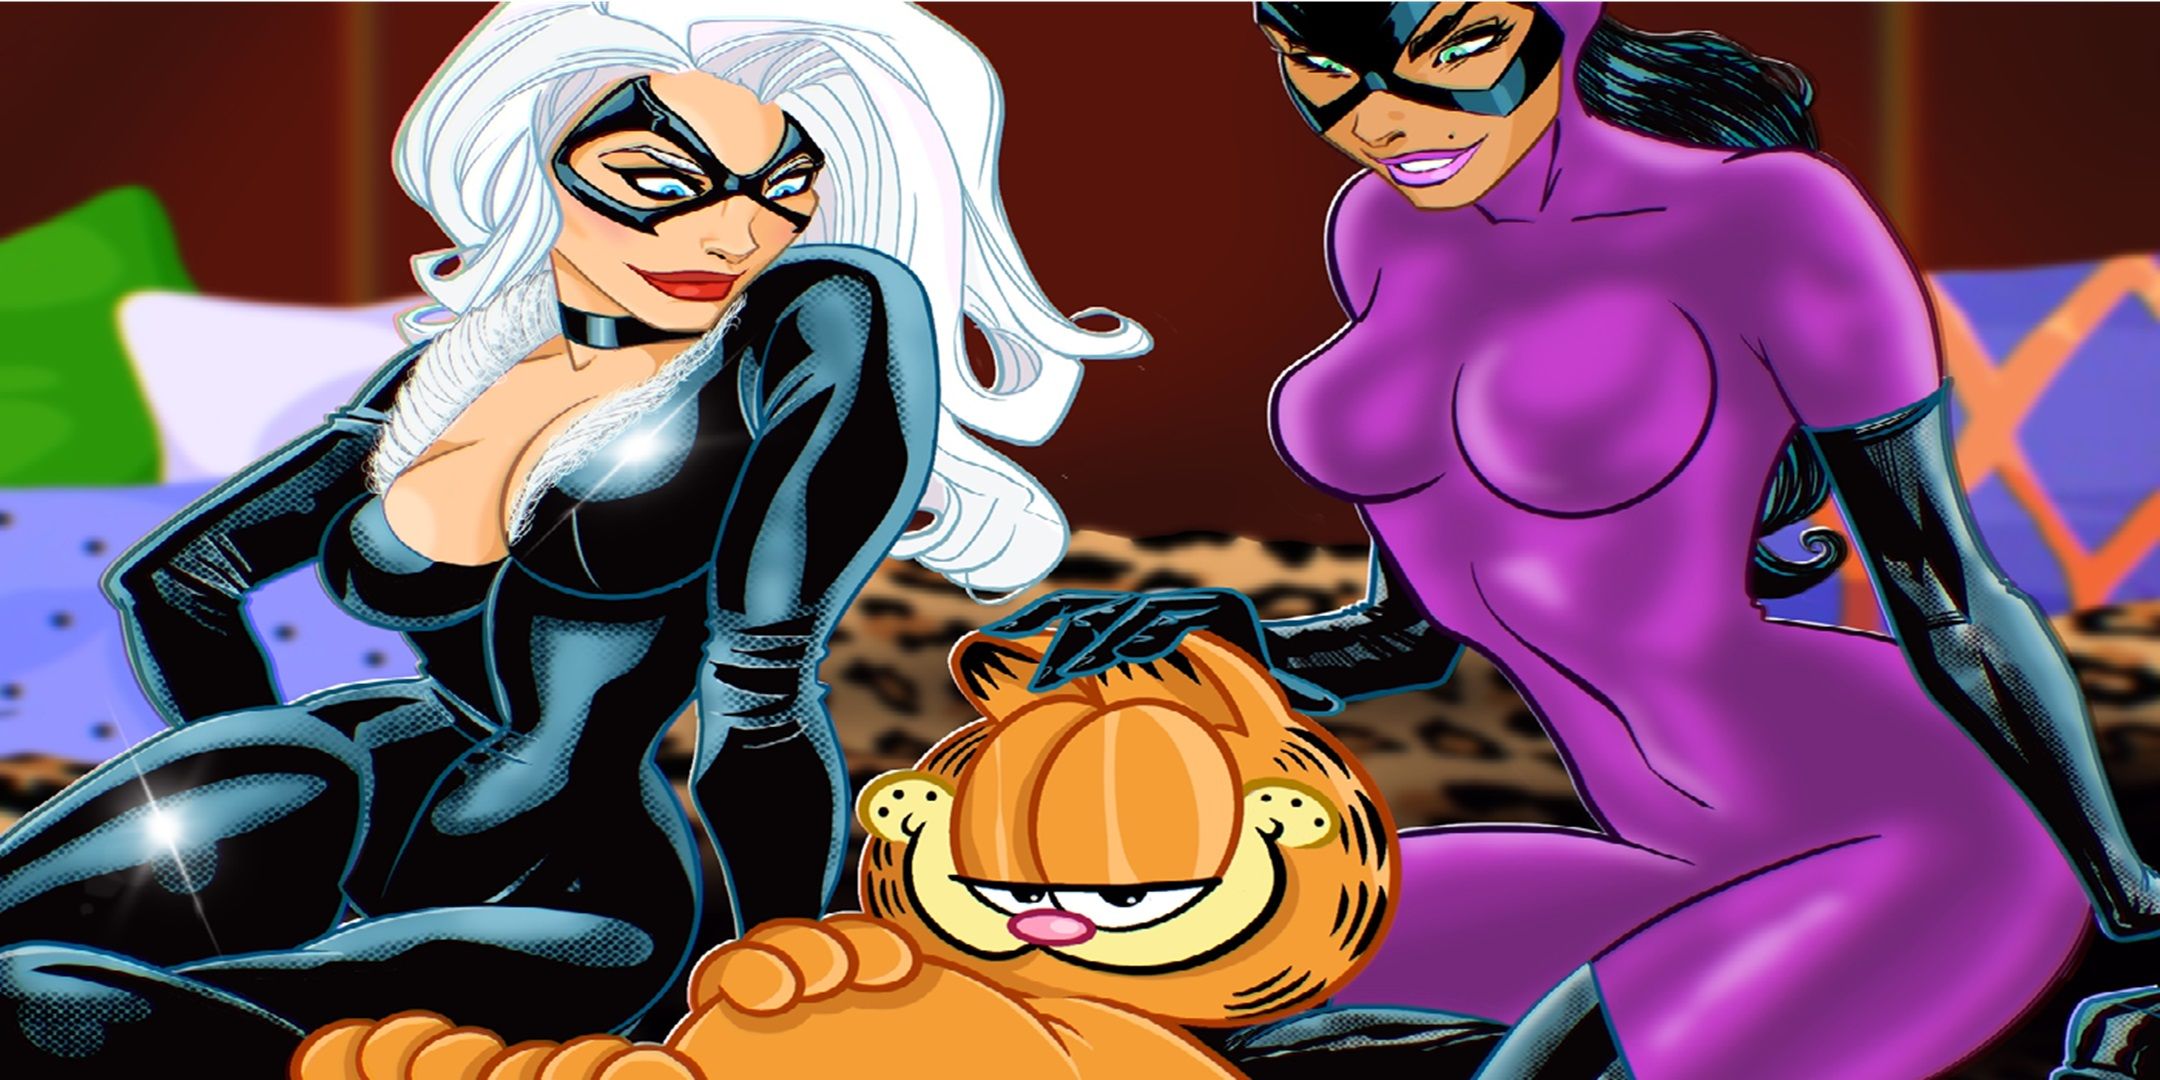 Garfield in the header with Black Cat and Catwoman